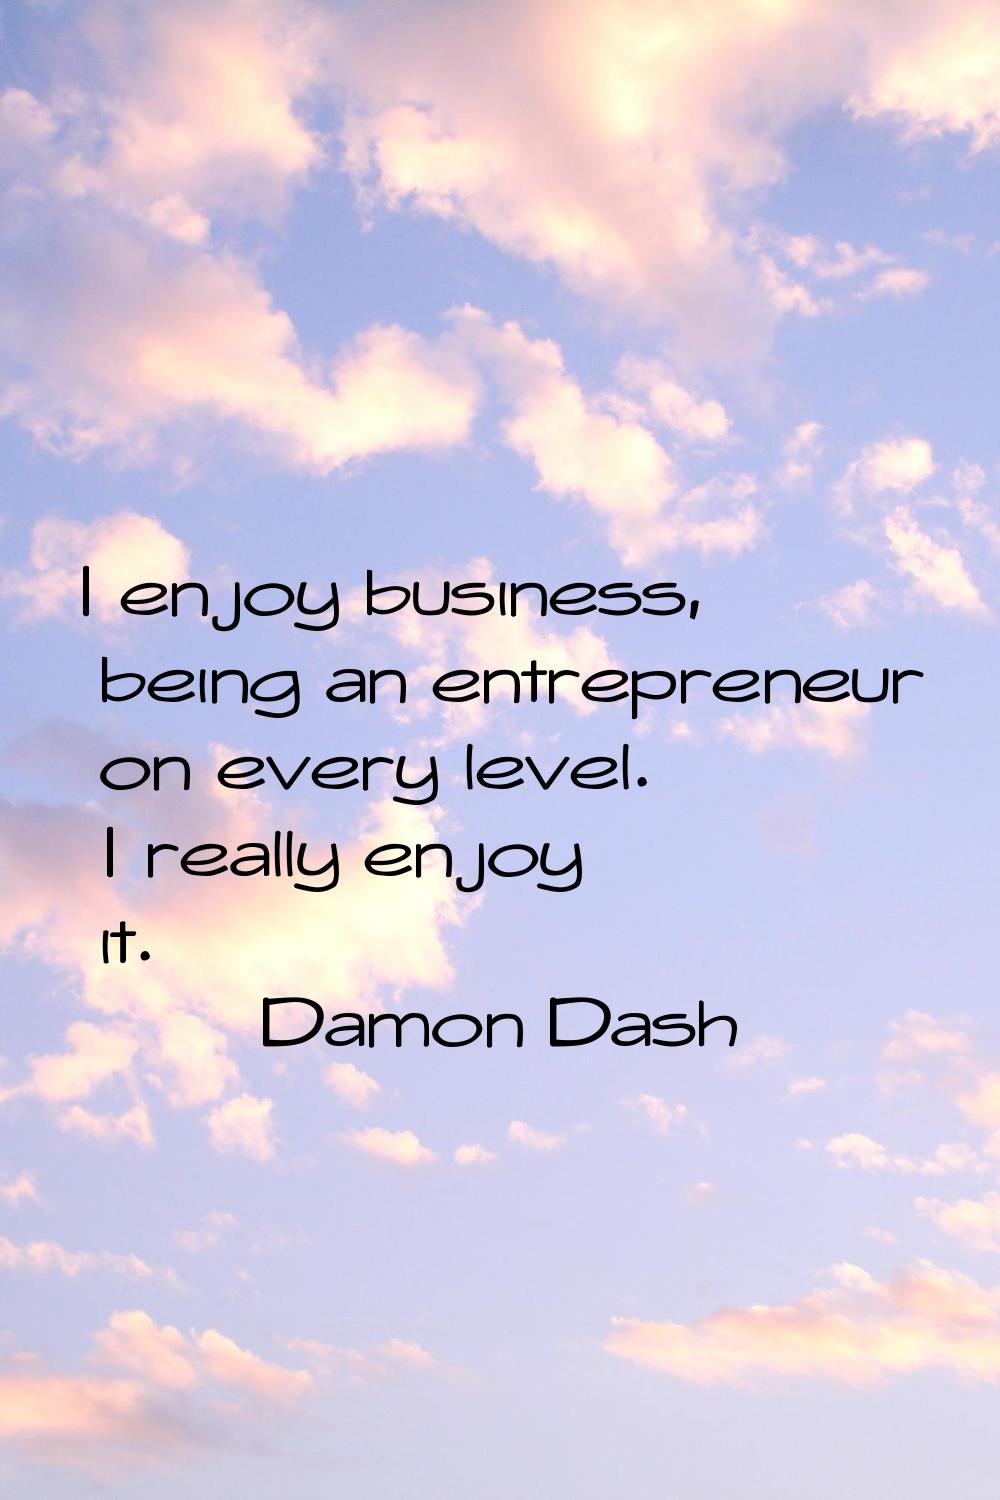 I enjoy business, being an entrepreneur on every level. I really enjoy it.